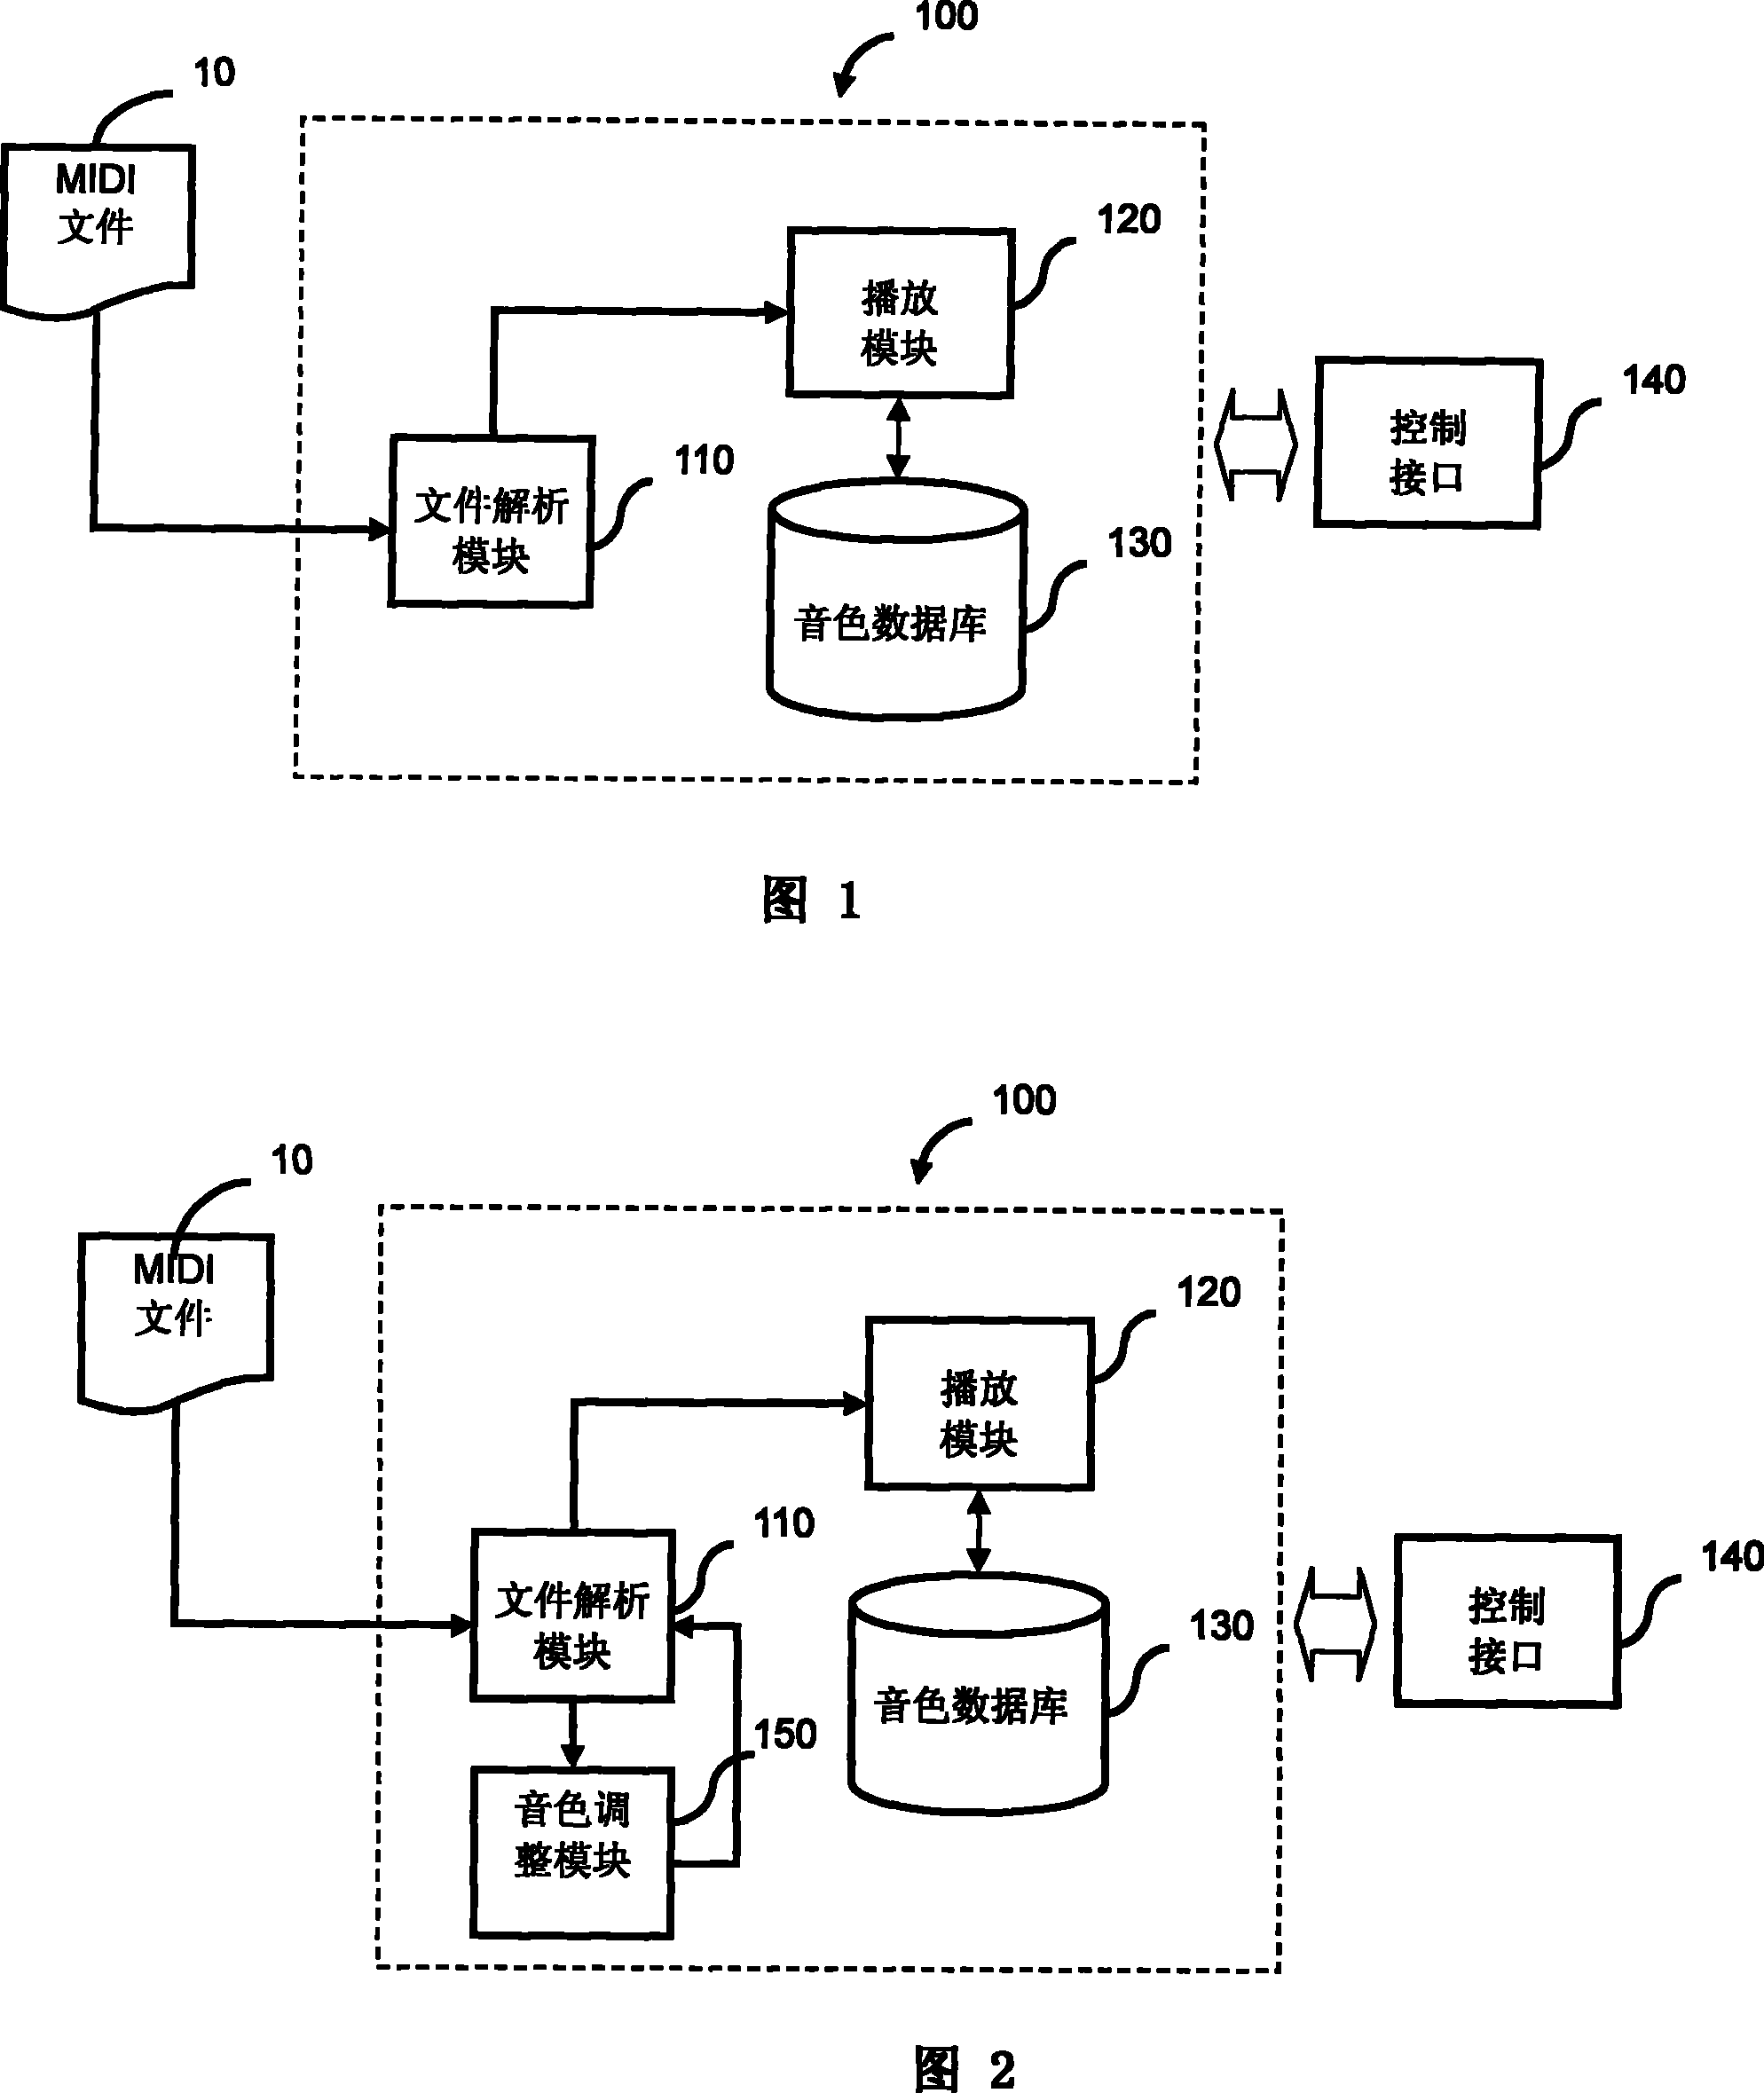 Personal adaptive MIDI playing system and method thereof